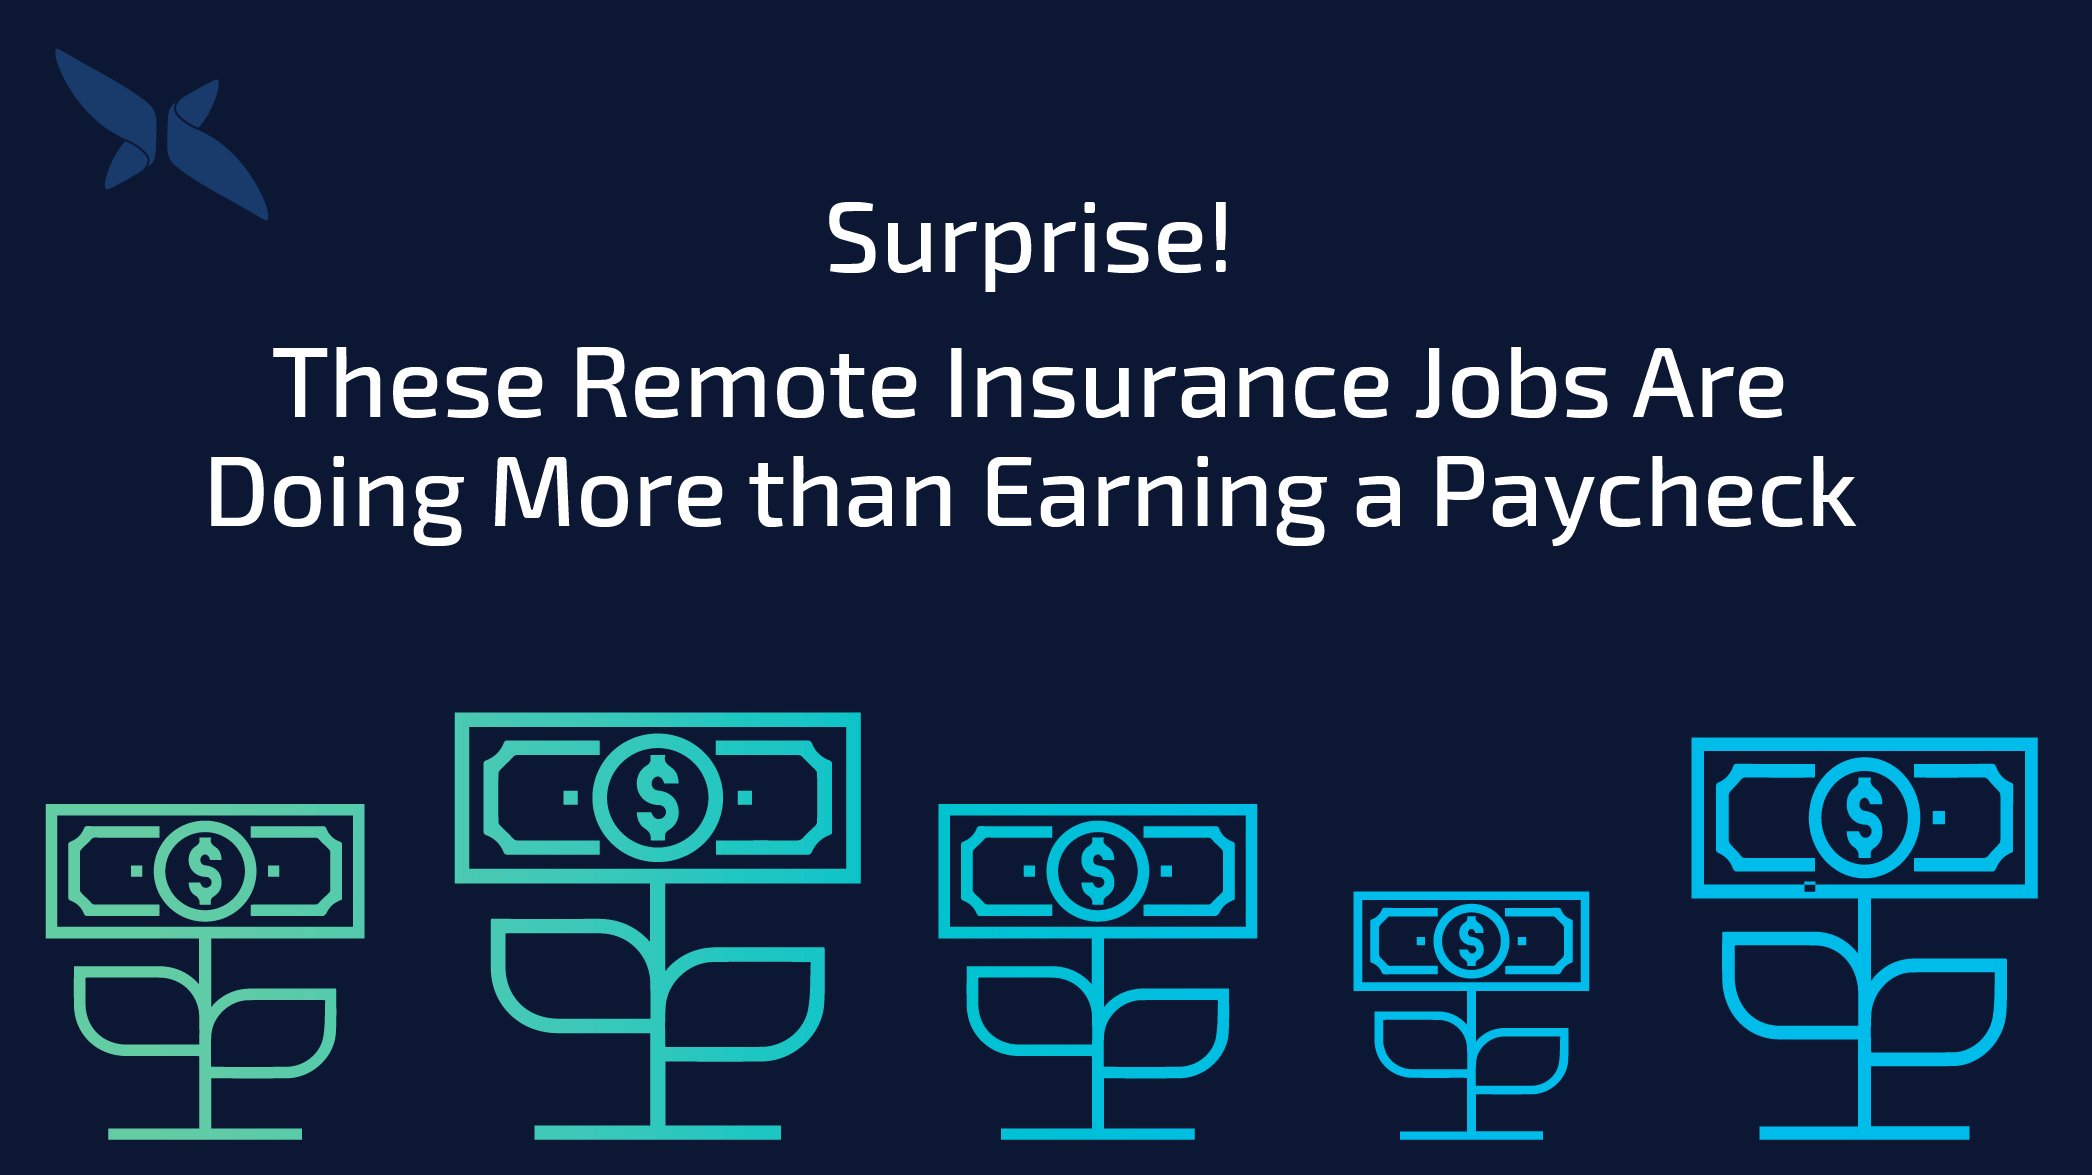 Surprise! These Remote Insurance Jobs Are Doing More than Earning a Paycheck